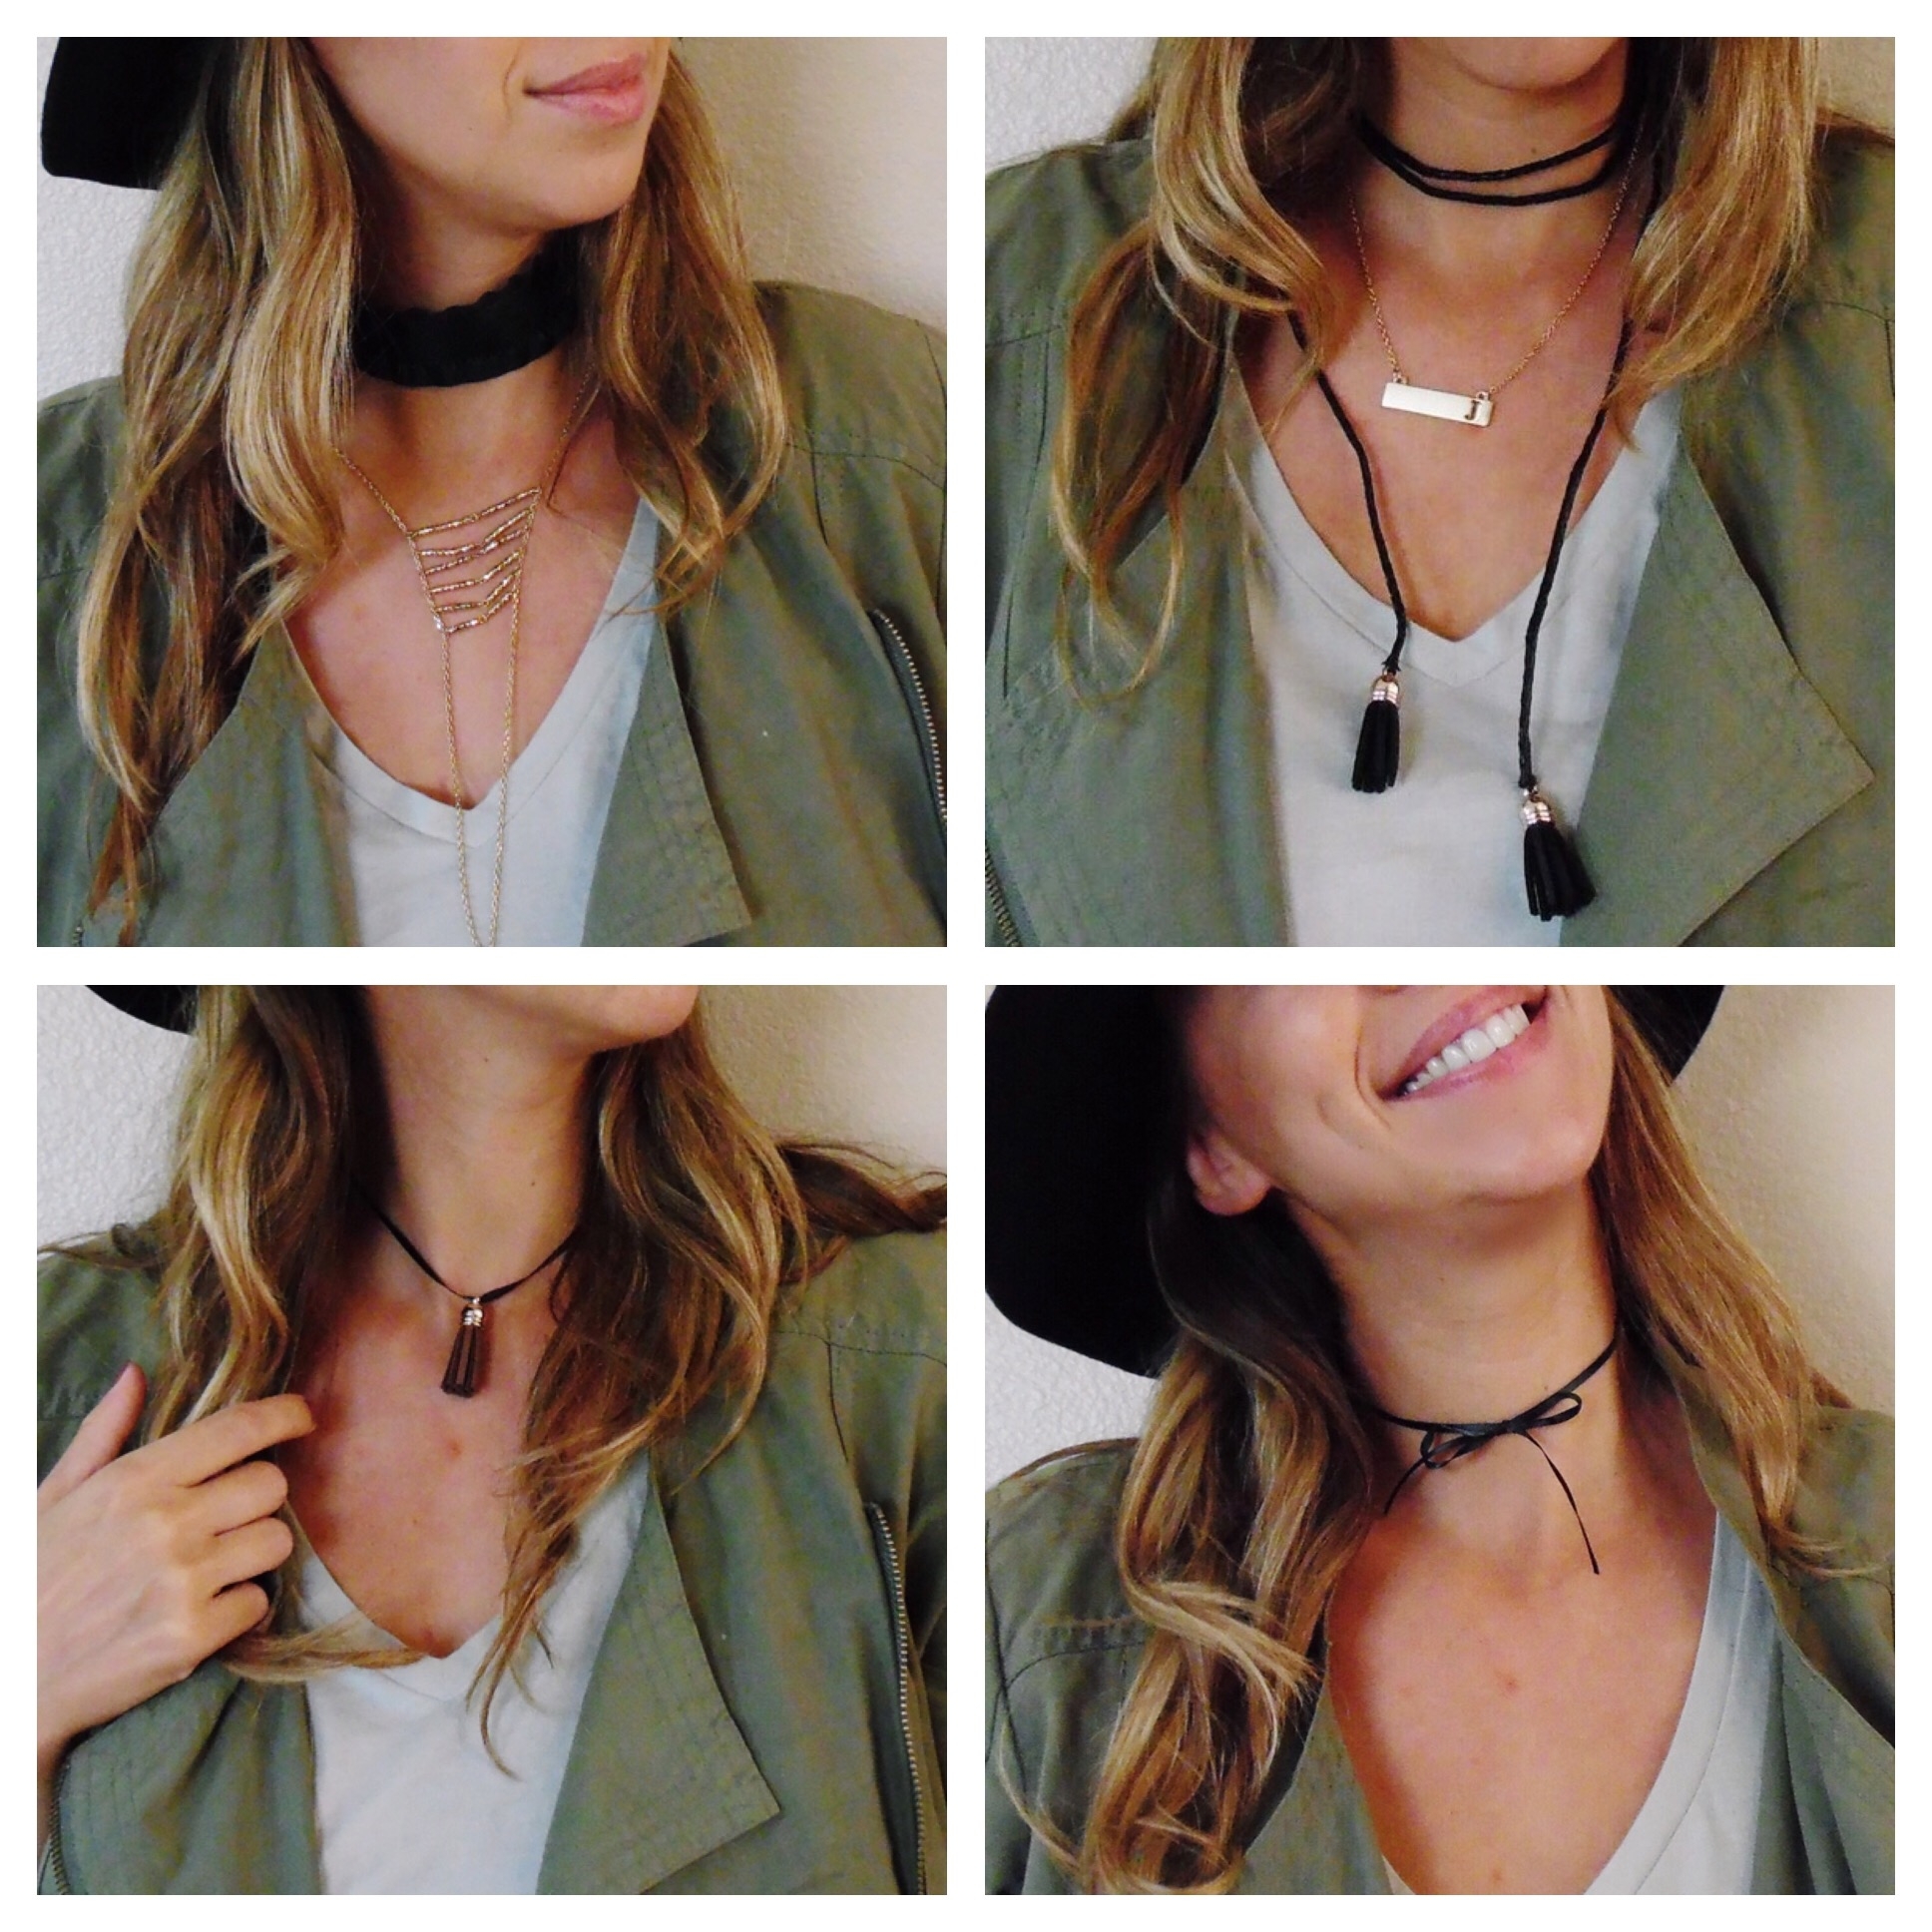 How to Make a Choker Necklace in Easy Simple Steps | Besos ... (1936 x 1936 Pixel)